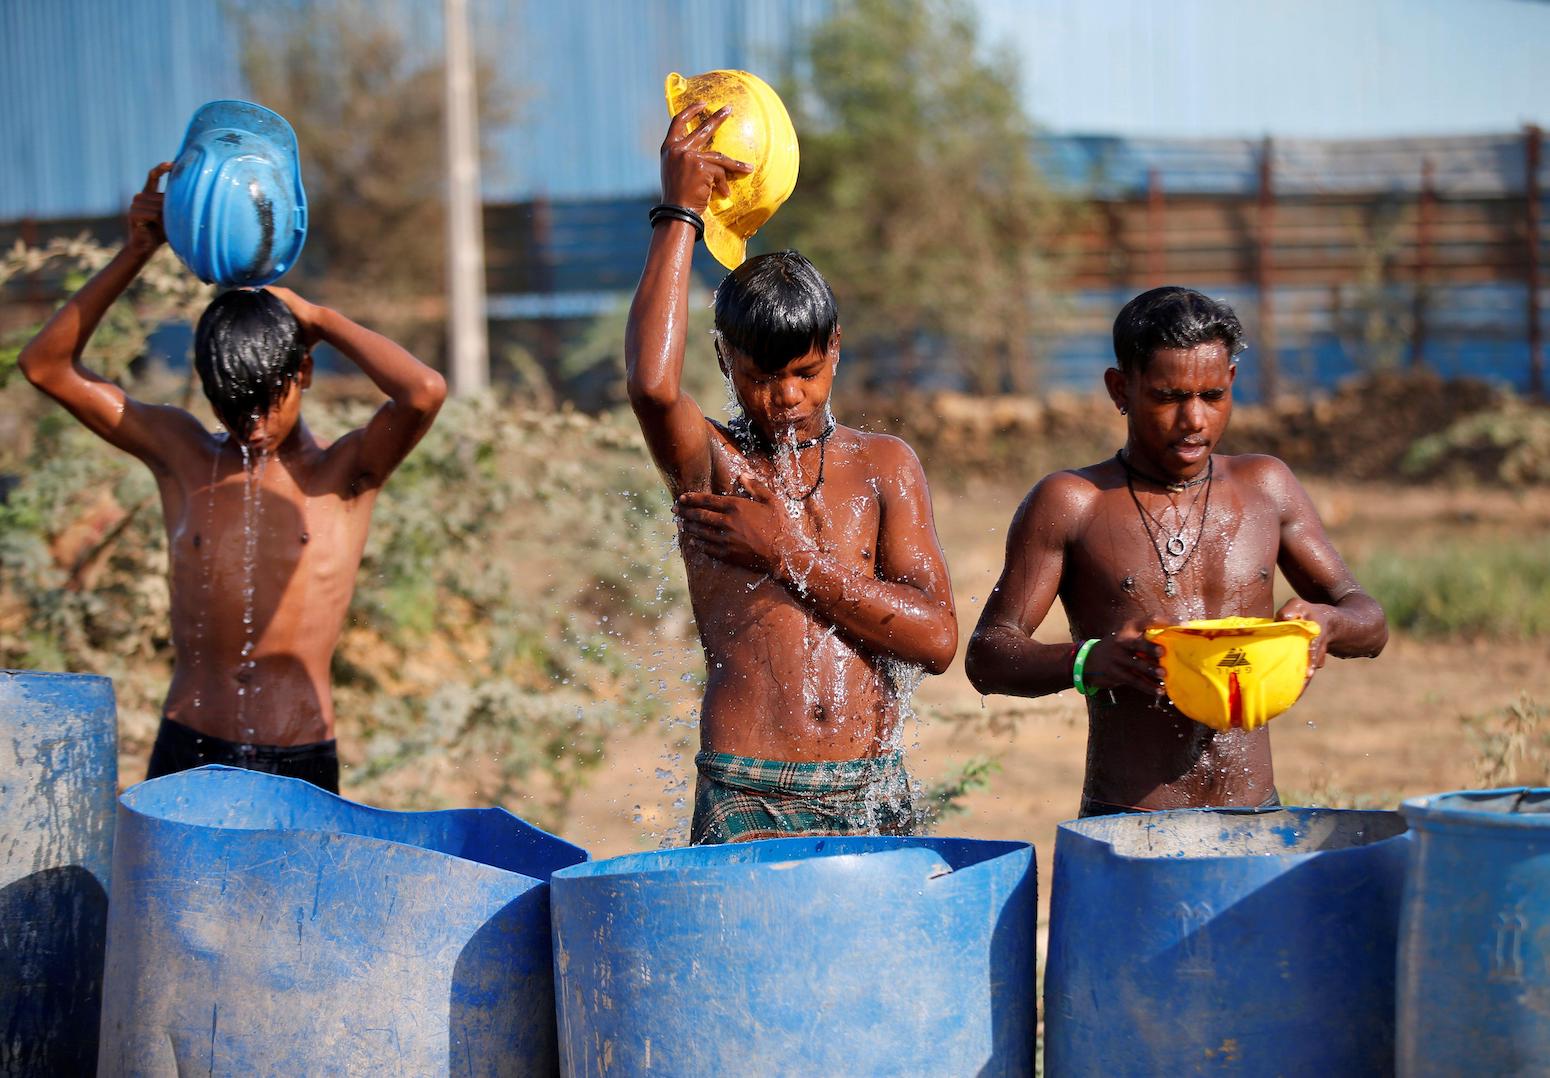 Construction workers cool themselves off during a heatwave in Ahmedabad, India